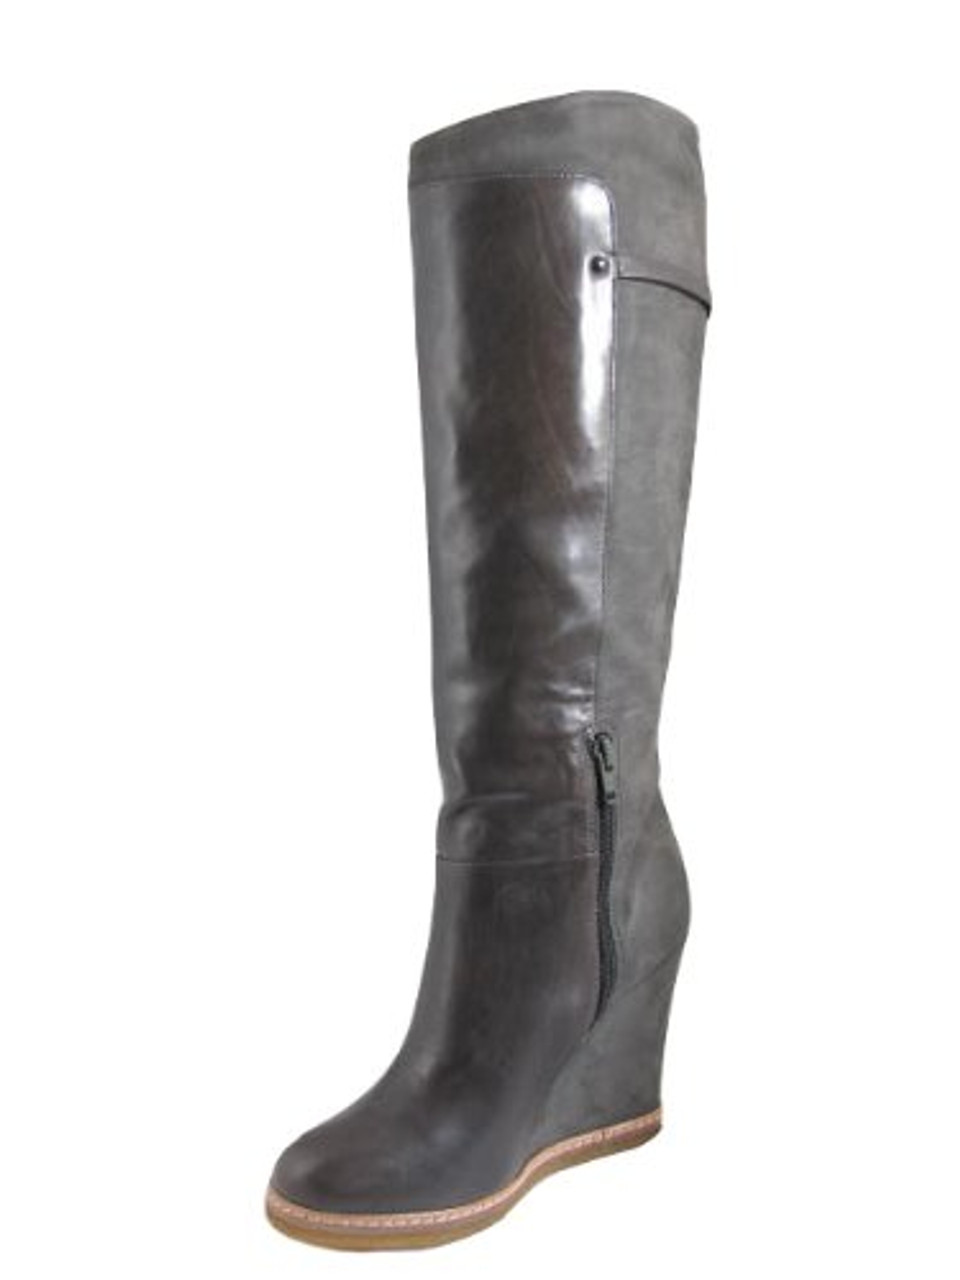 wedge dress boots